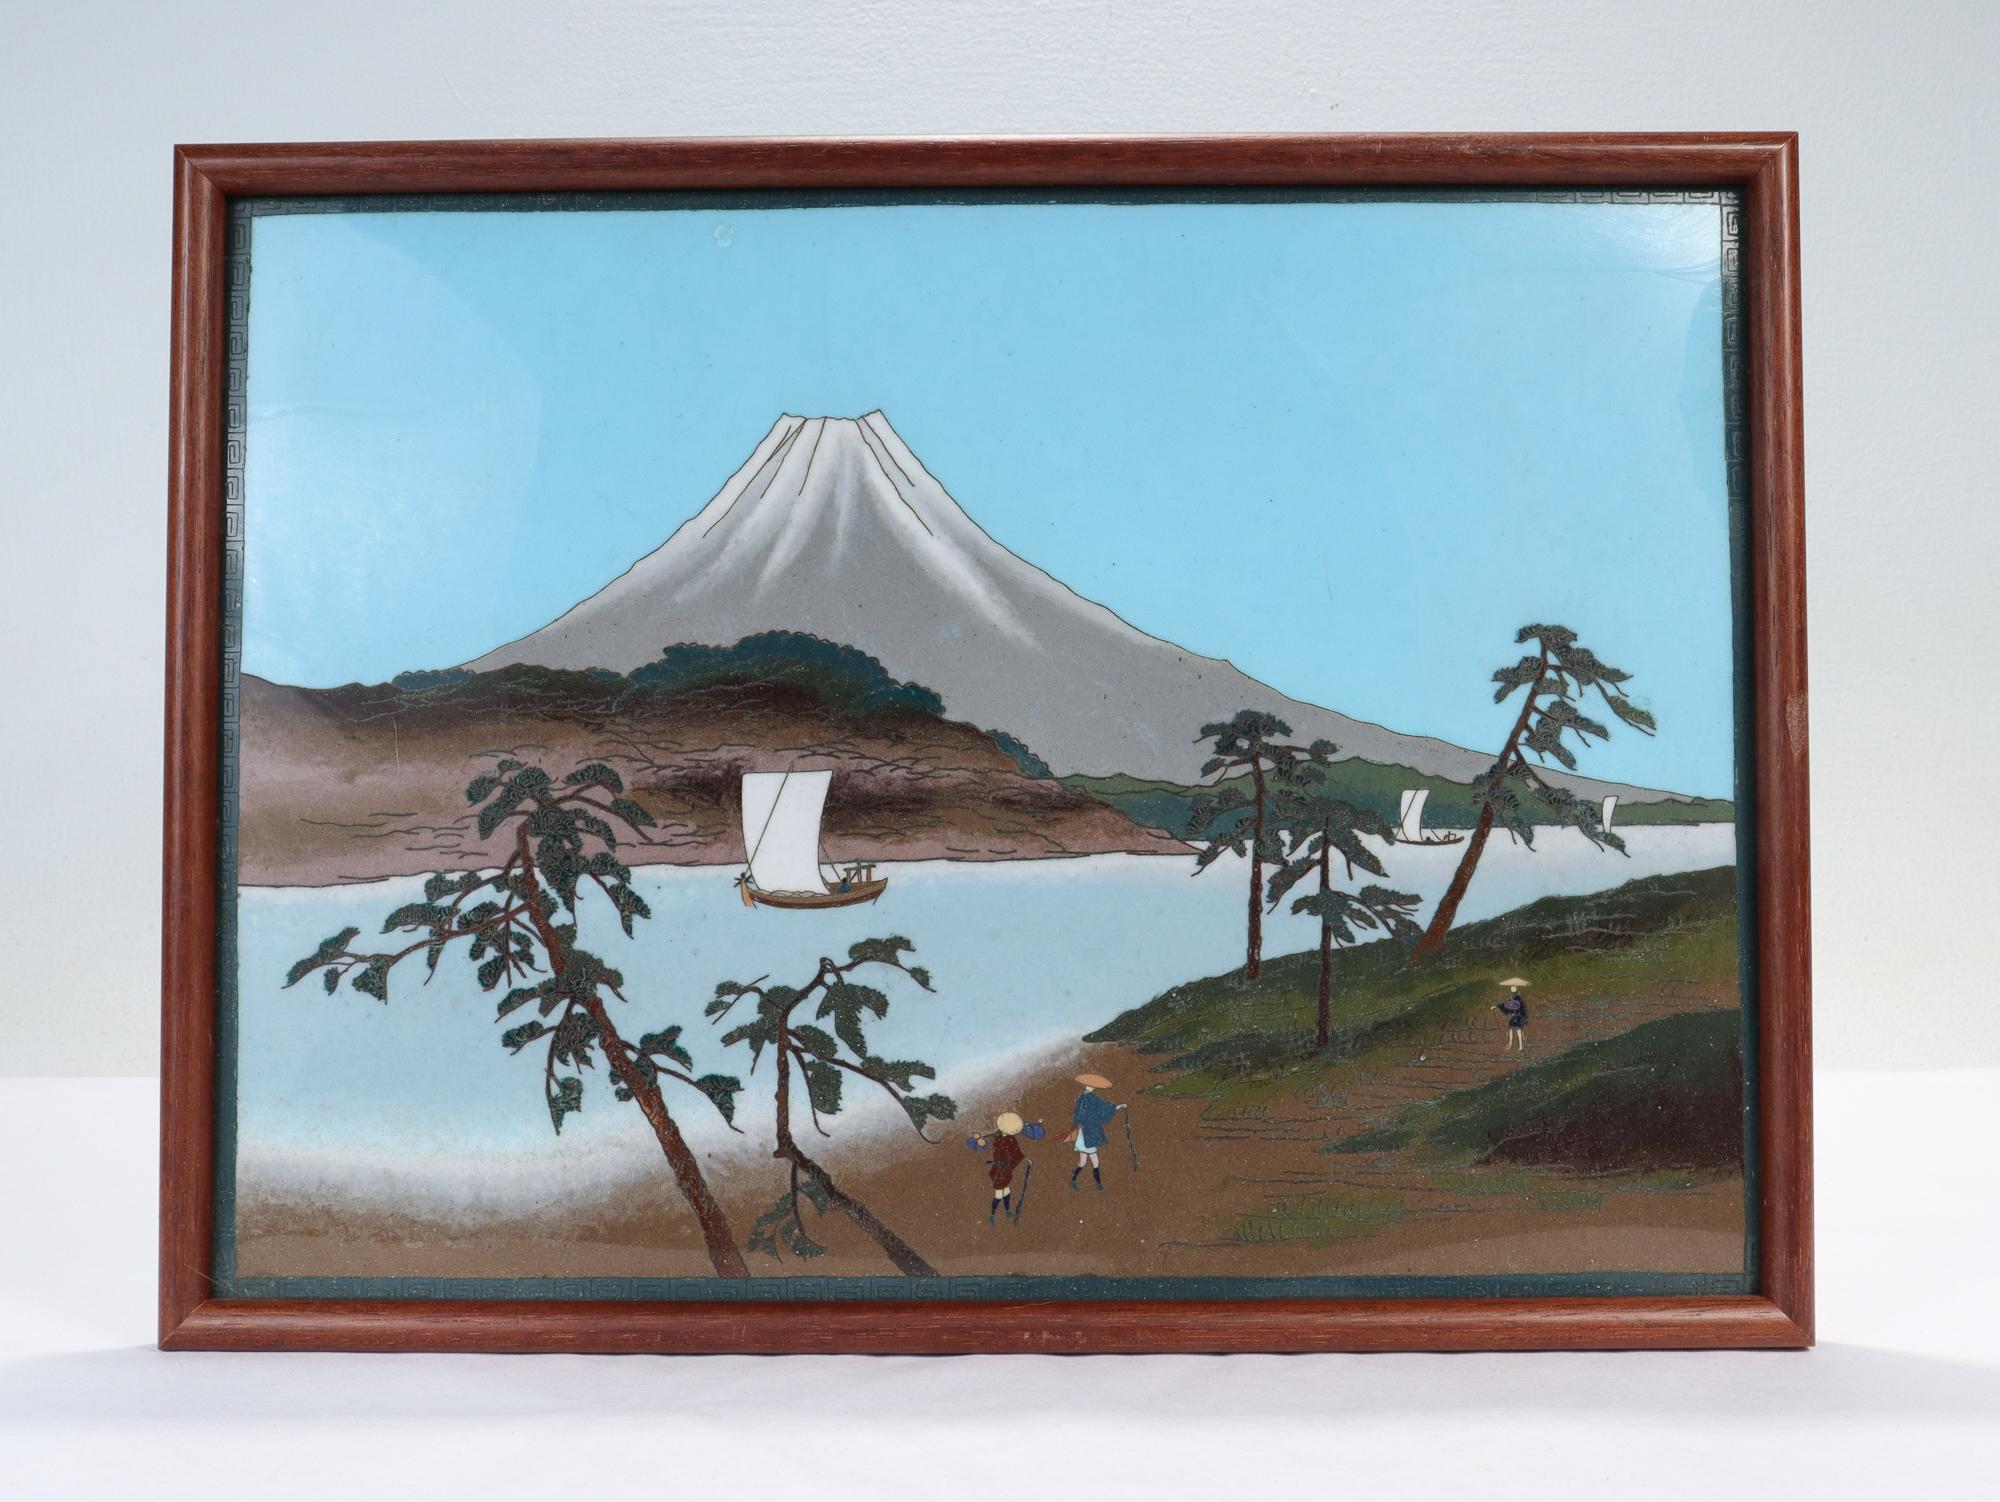 A fine antique Japanese cloisonne enamel landscape.

Depicting an idyllic riverside view of farmers and sail boats against a Mt. Fuji background.

Simply a wonderful cloisonné panel! 

Date:
Late 19th or Early 20th Century

Overall